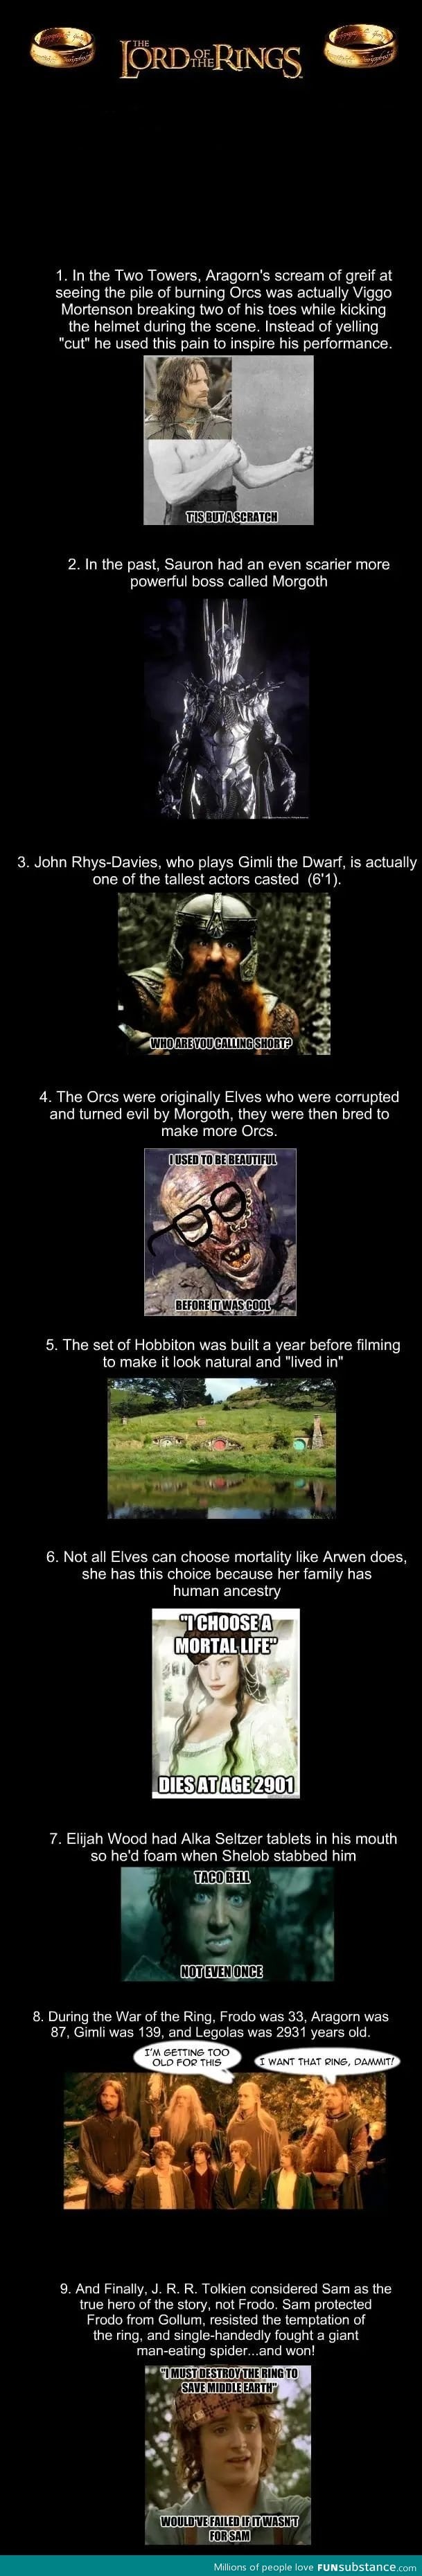 Lord Of The Rings Facts